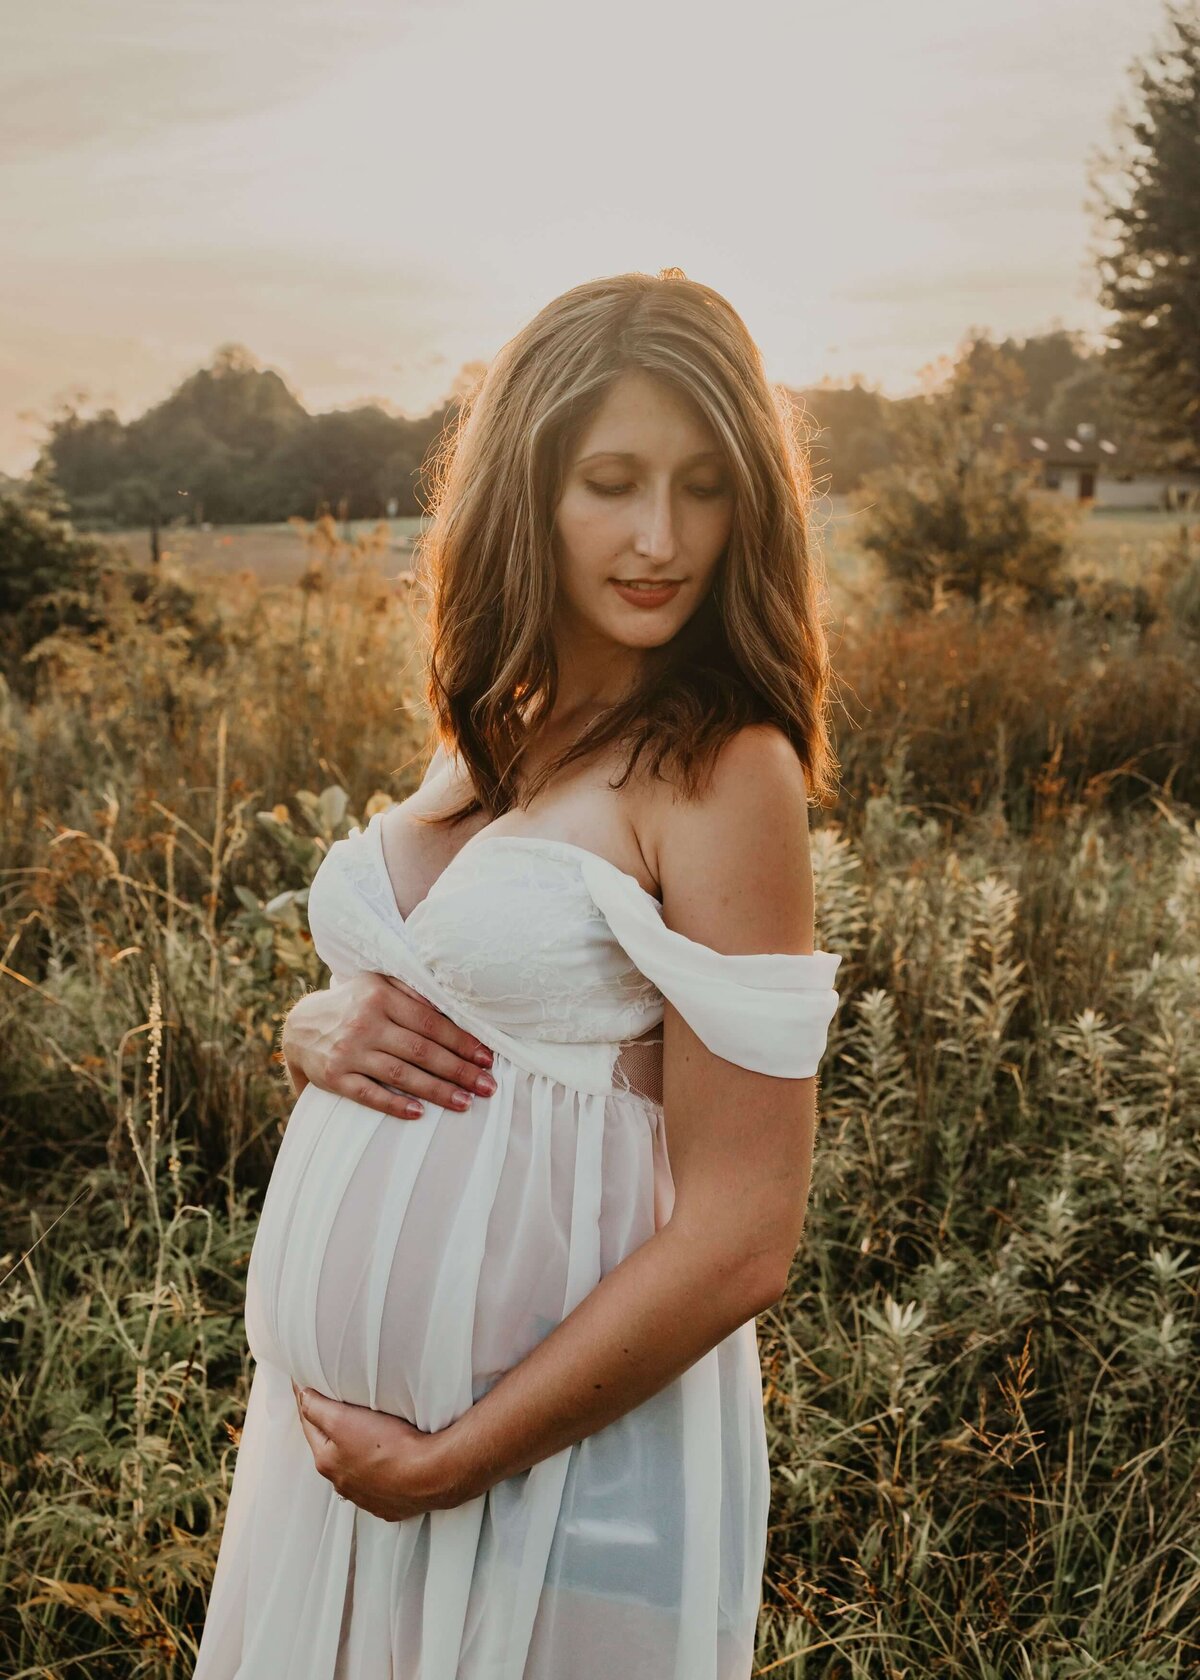 A pregnant woman in a white dress standing in a field, captured by a Pittsburgh maternity photographer.